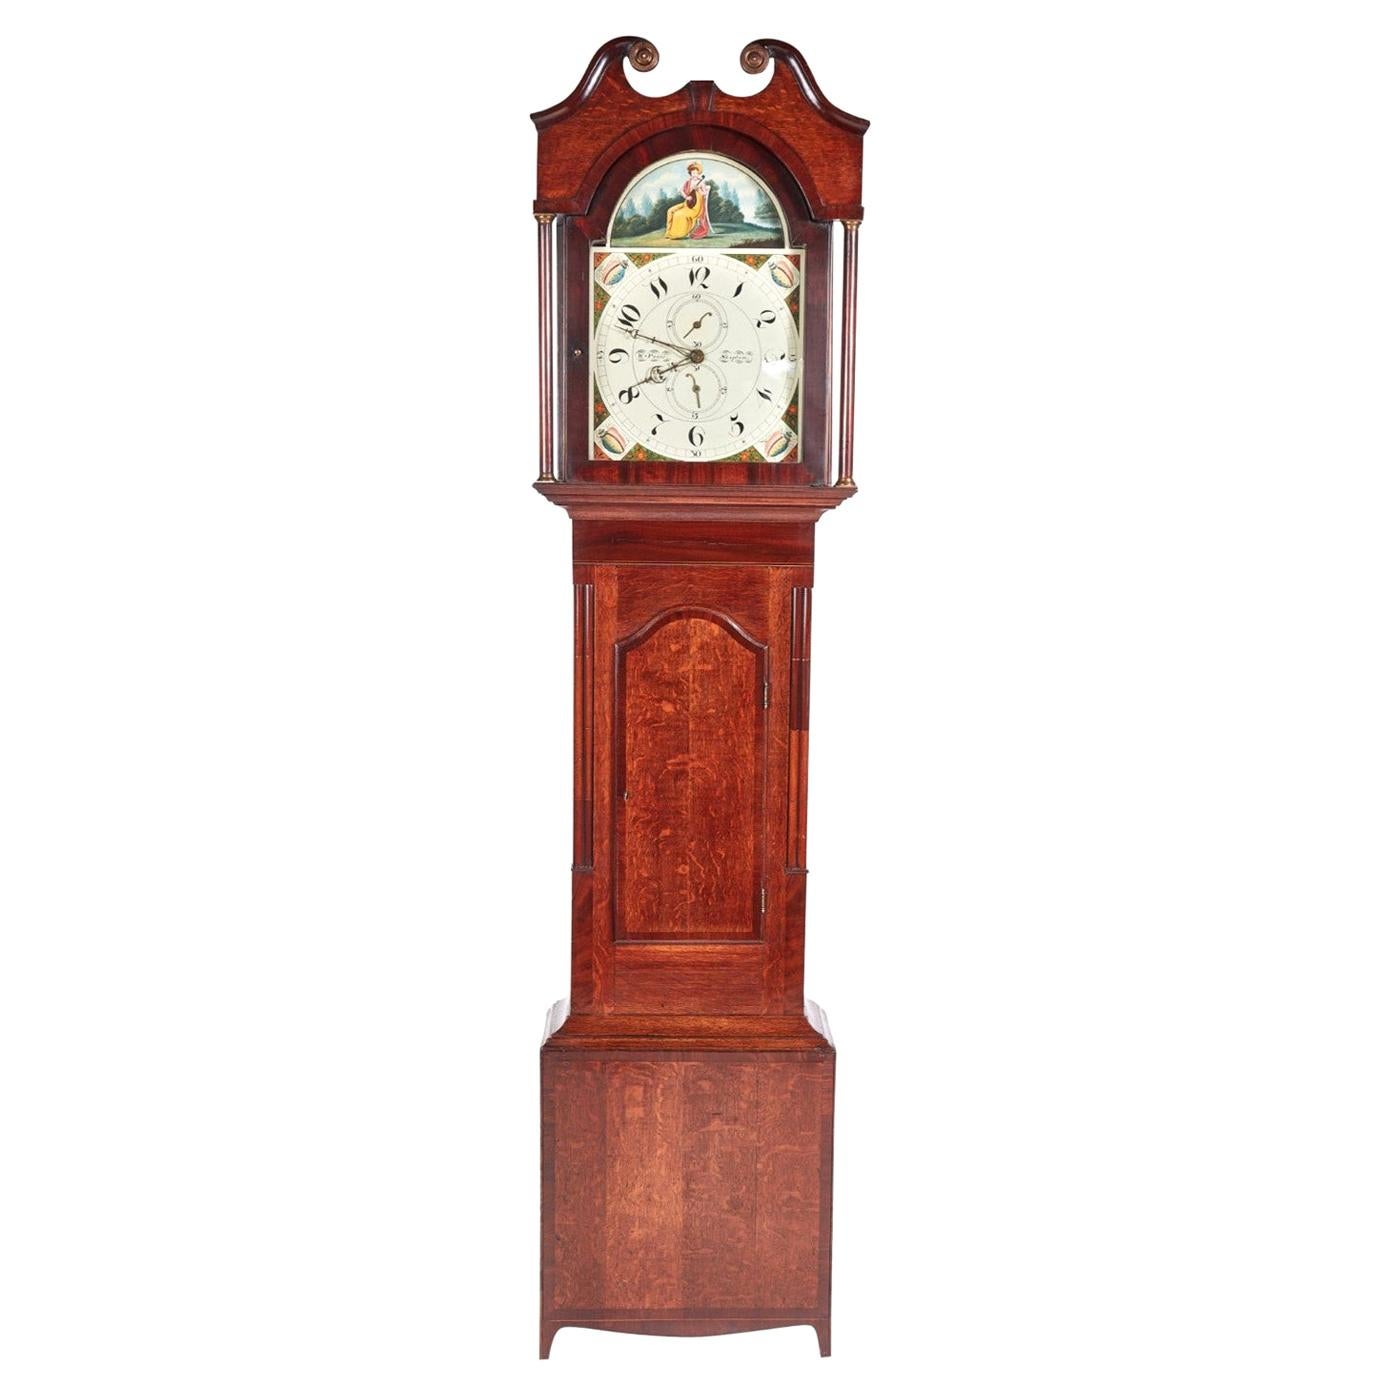 Antique Oak and Mahogany Grandfather Clock by W Prior Skipton